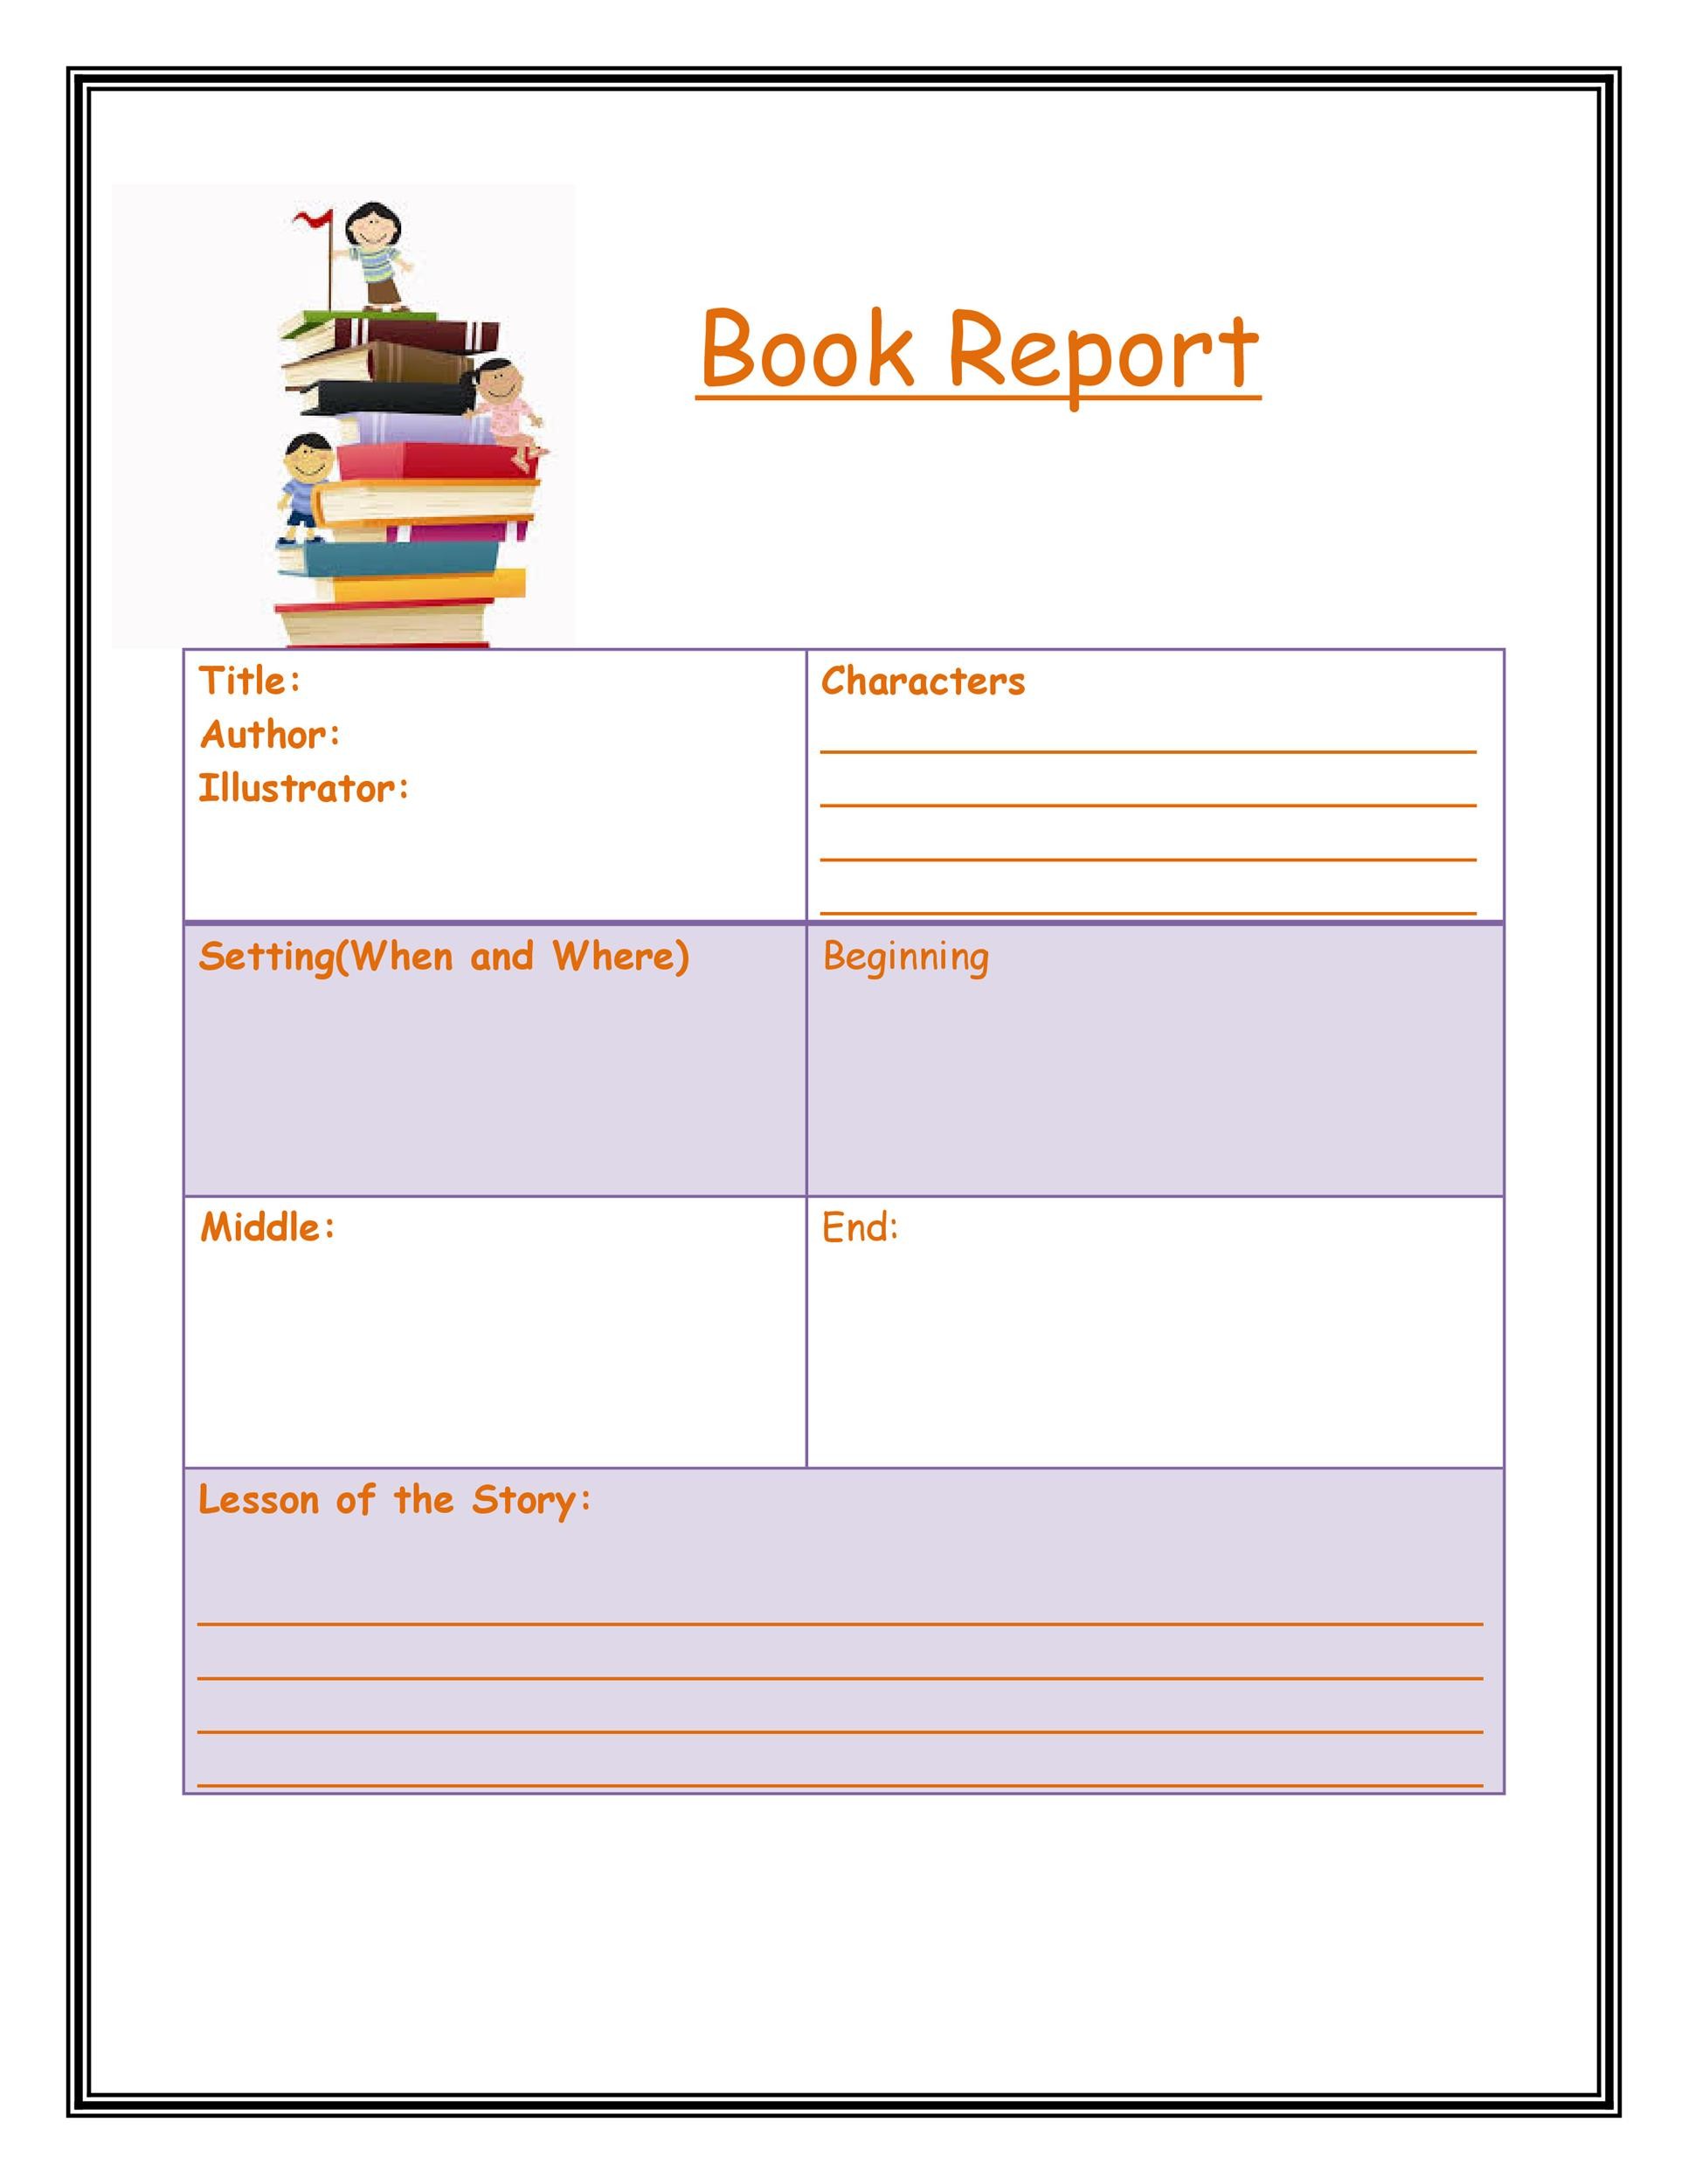 10th grade book report directions